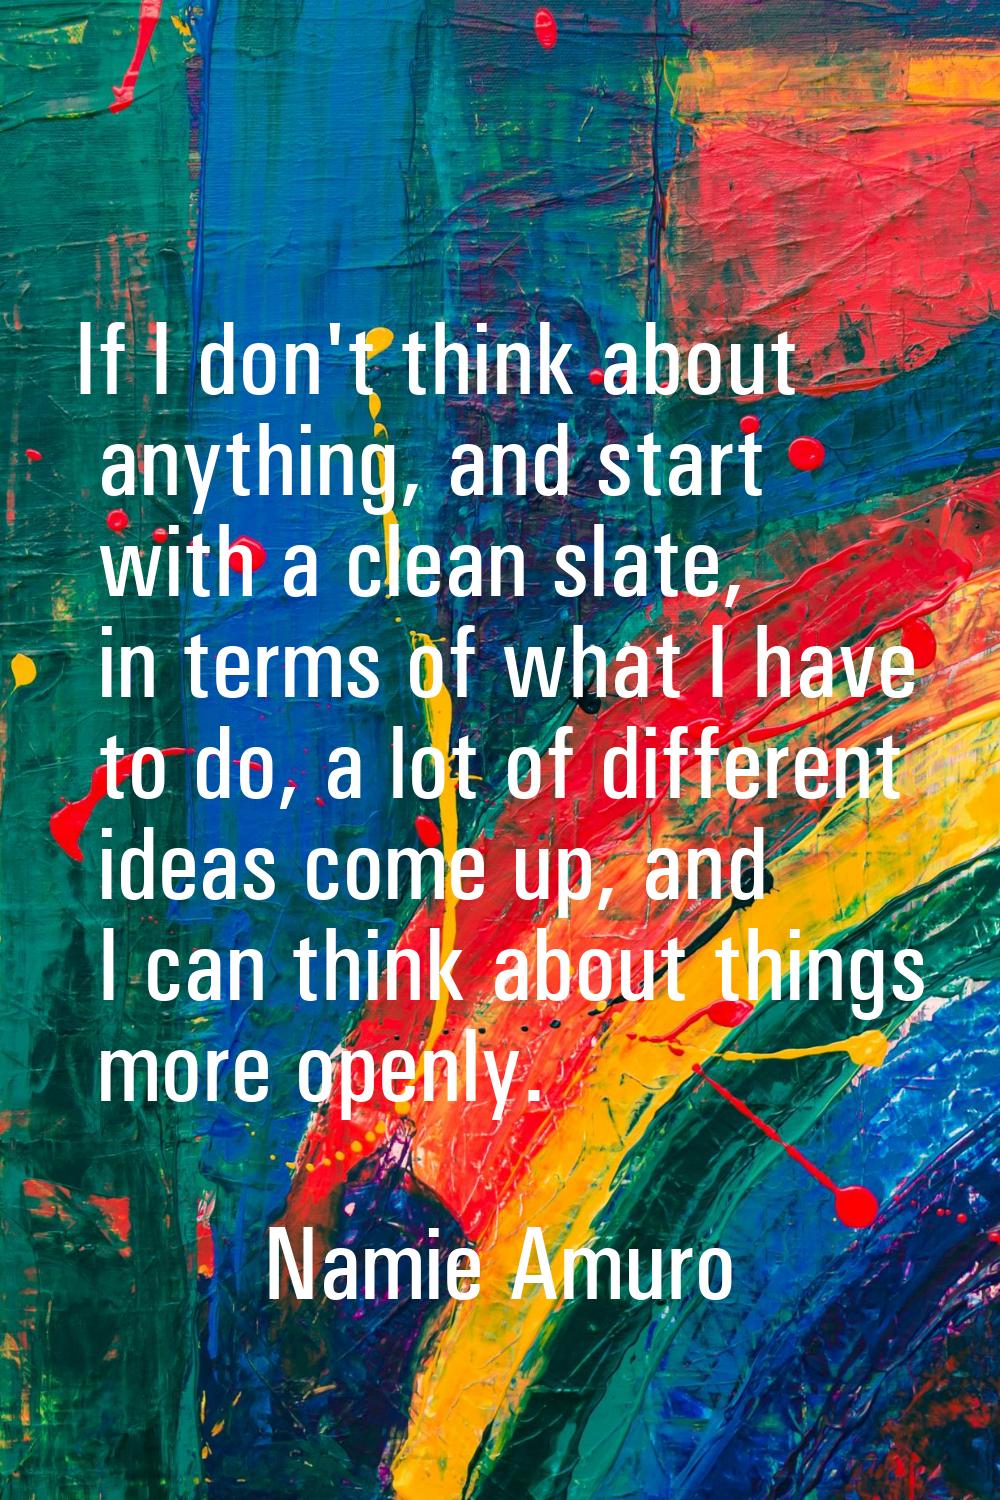 If I don't think about anything, and start with a clean slate, in terms of what I have to do, a lot